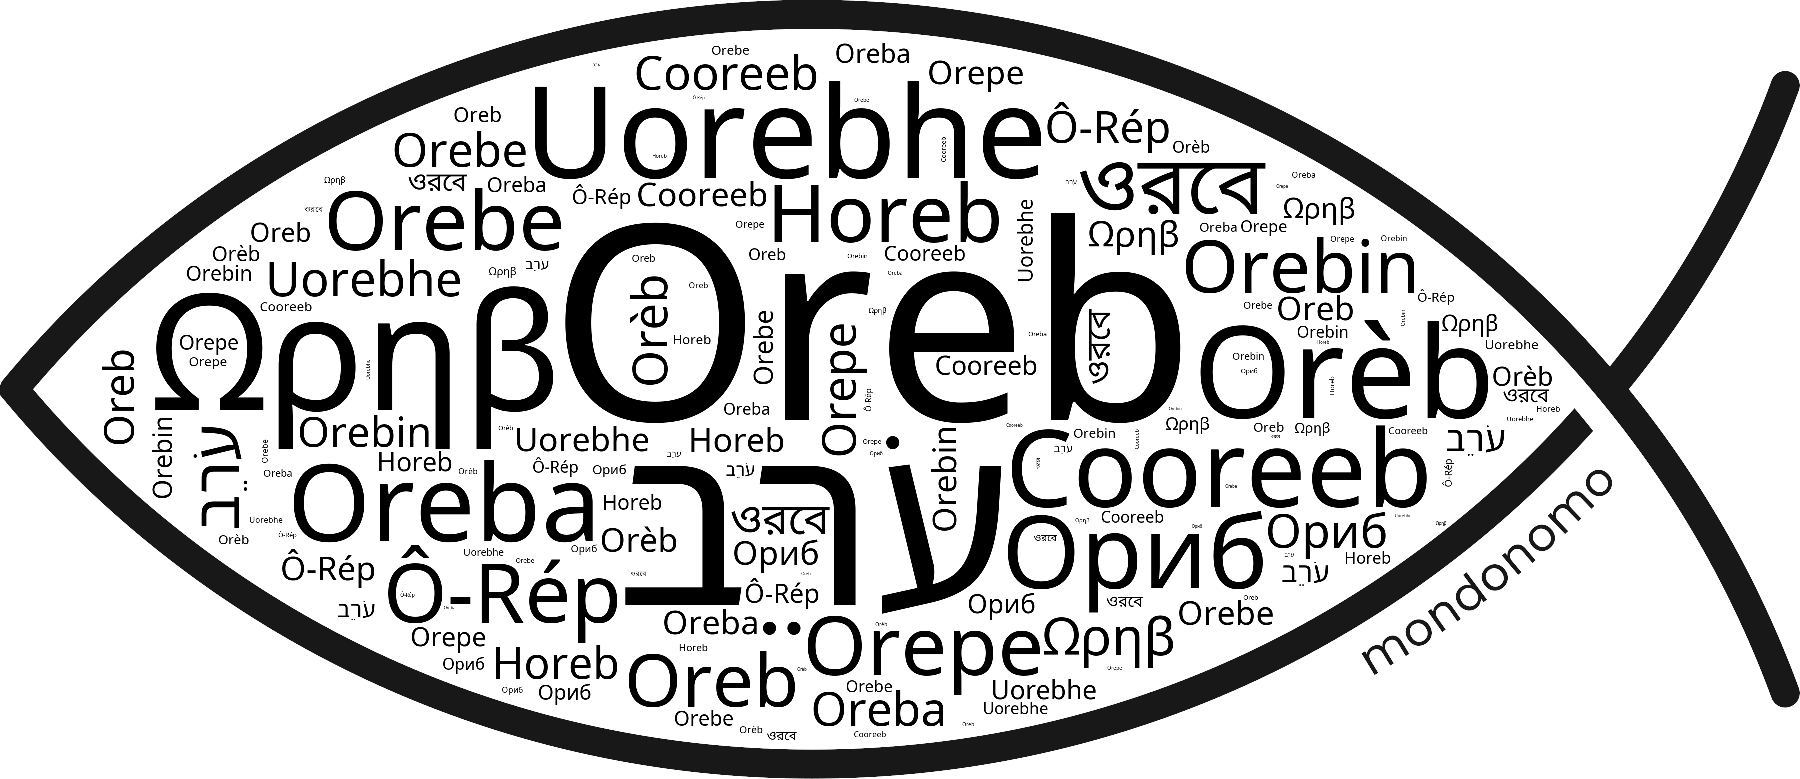 Name Oreb in the world's Bibles